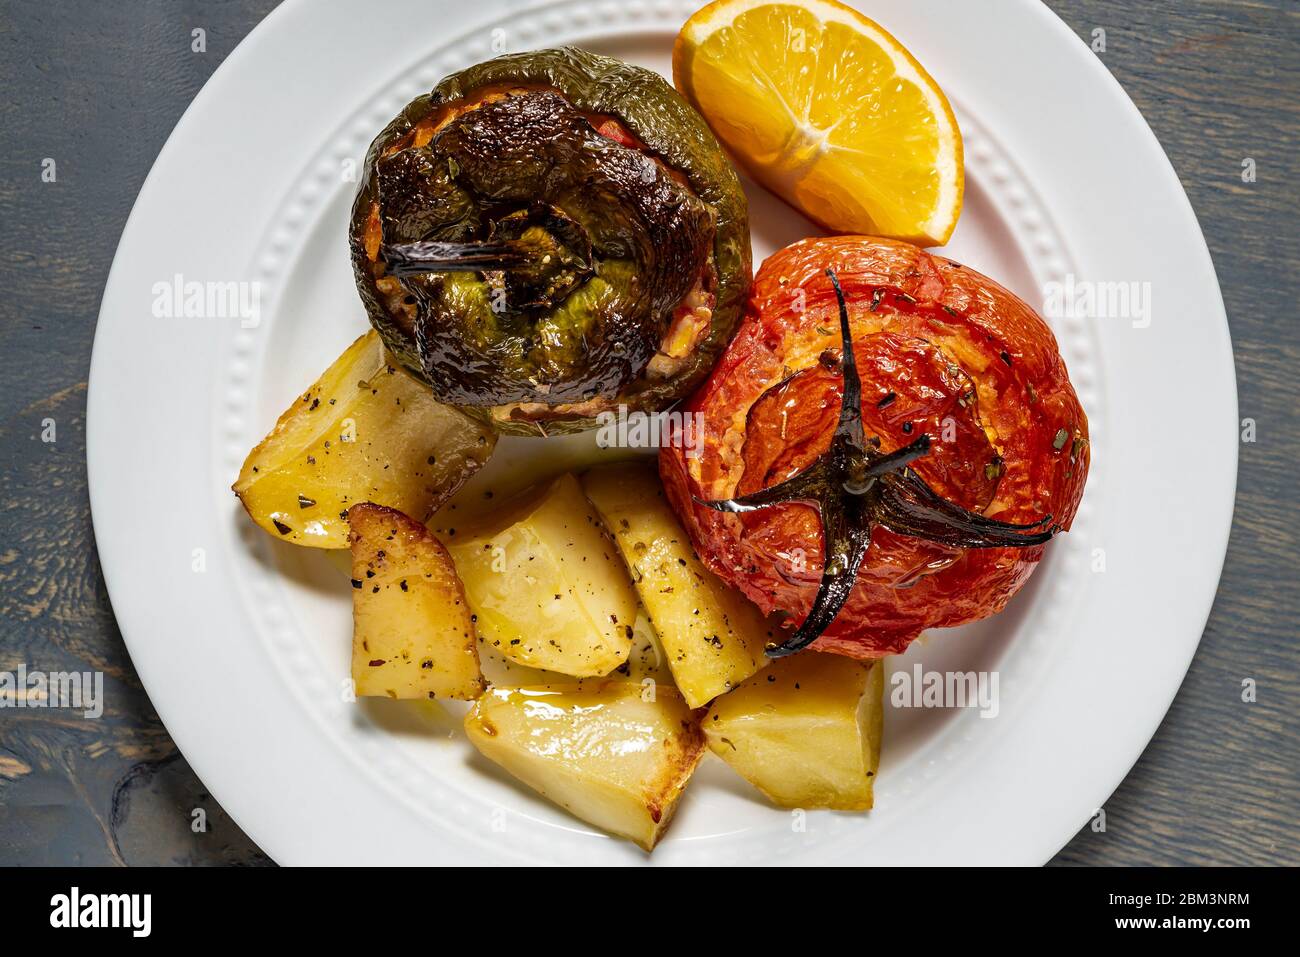 Vegan stuffed tomatoes and green pepper and roasted potatoes. Stock Photo